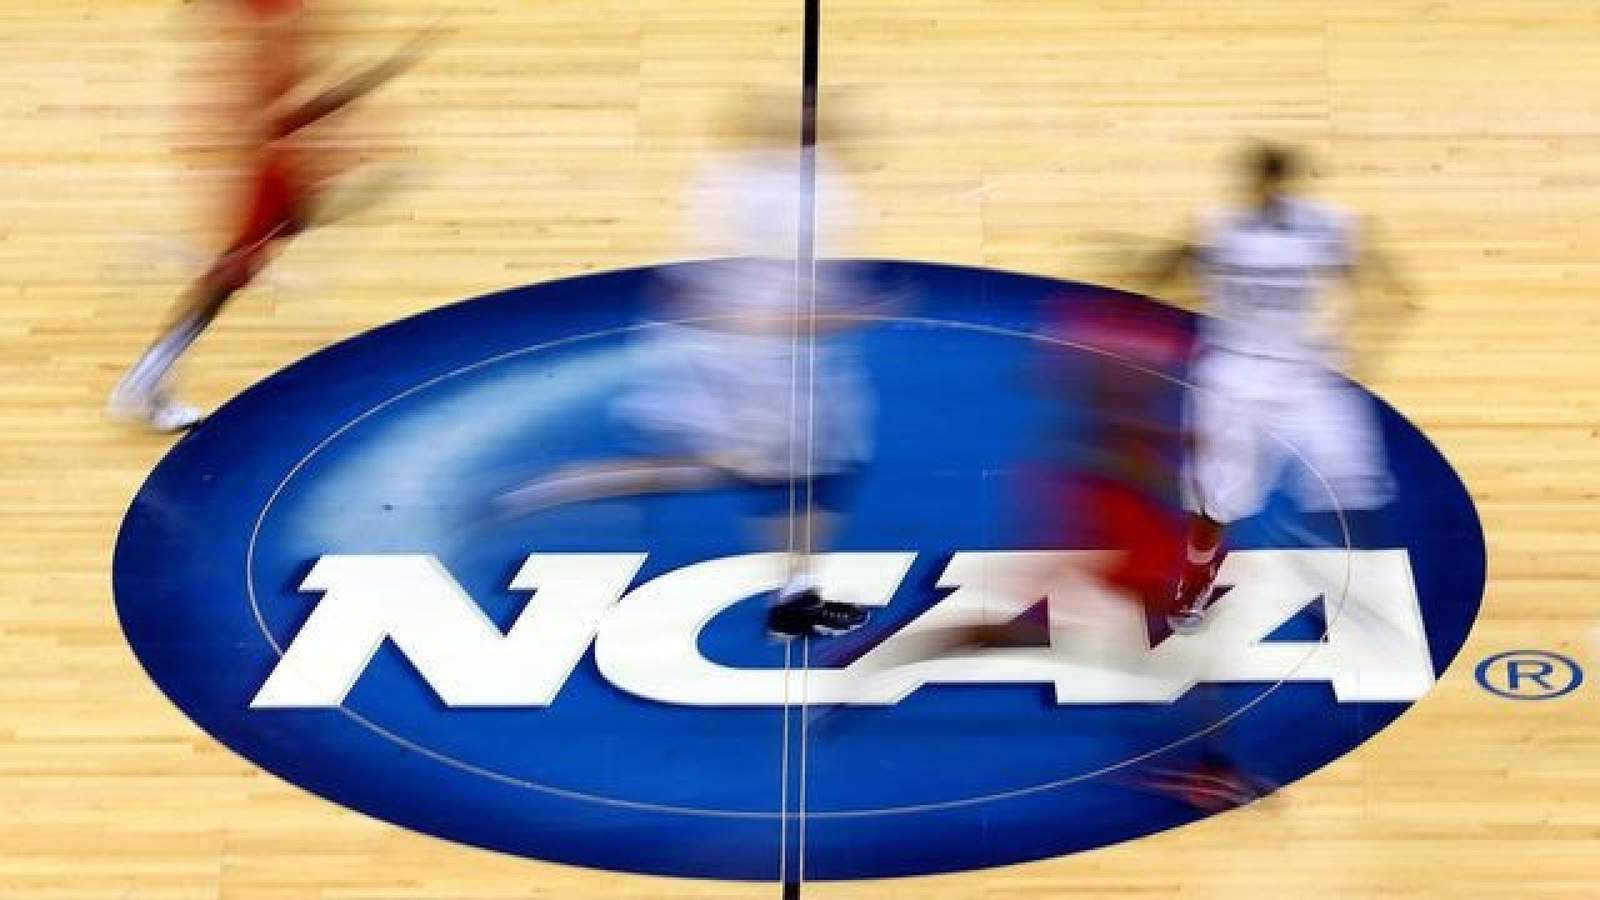 Men's March Madness will be played entirely in Indiana